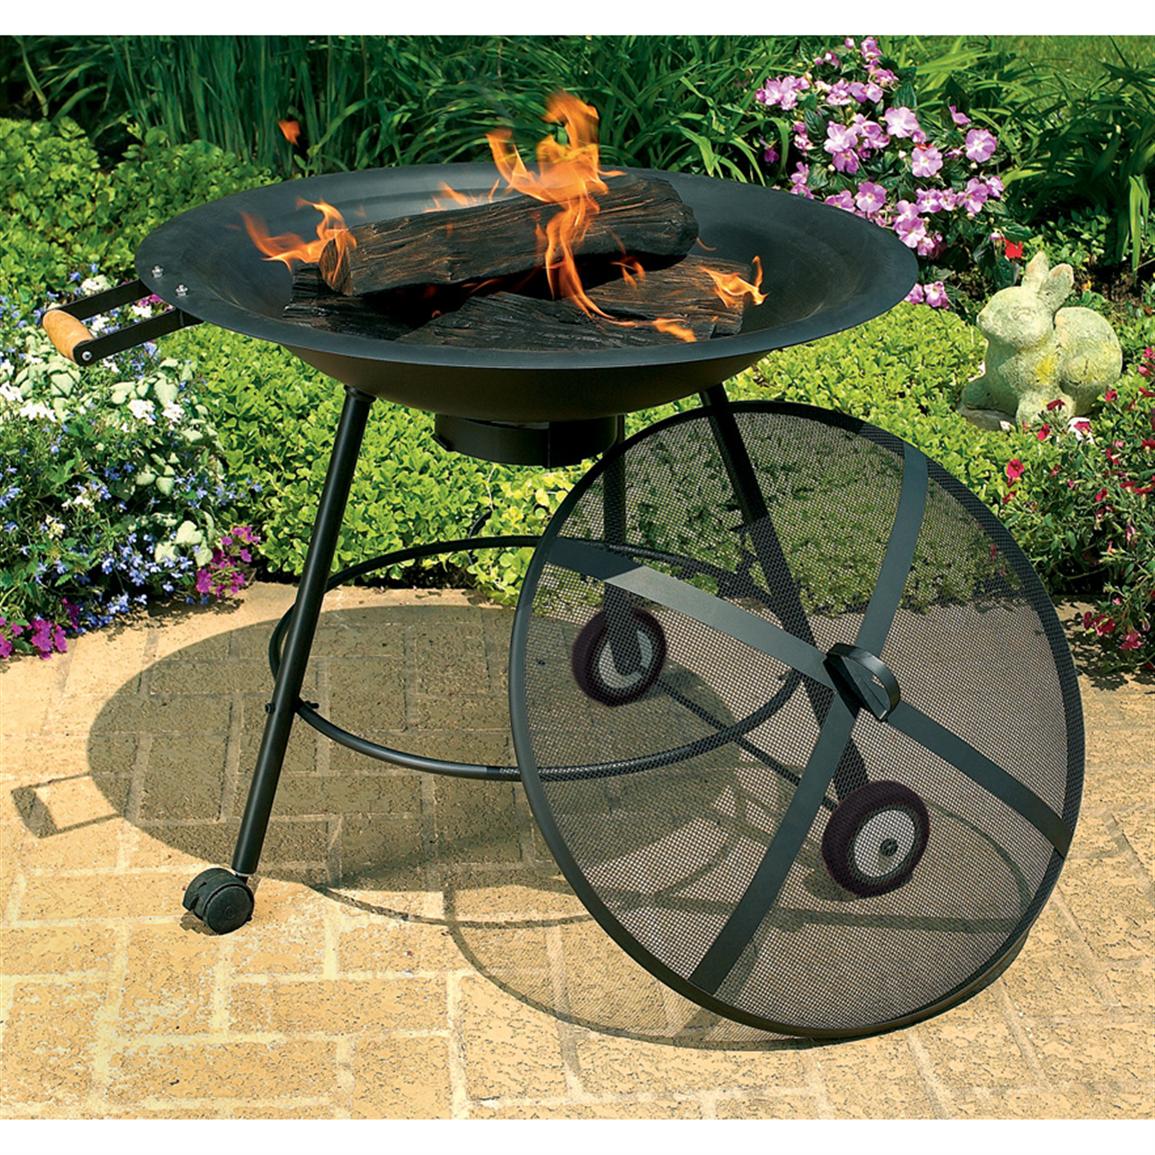 Cobraco Round Portable Fire Pit With, Fire Pit On Wheels